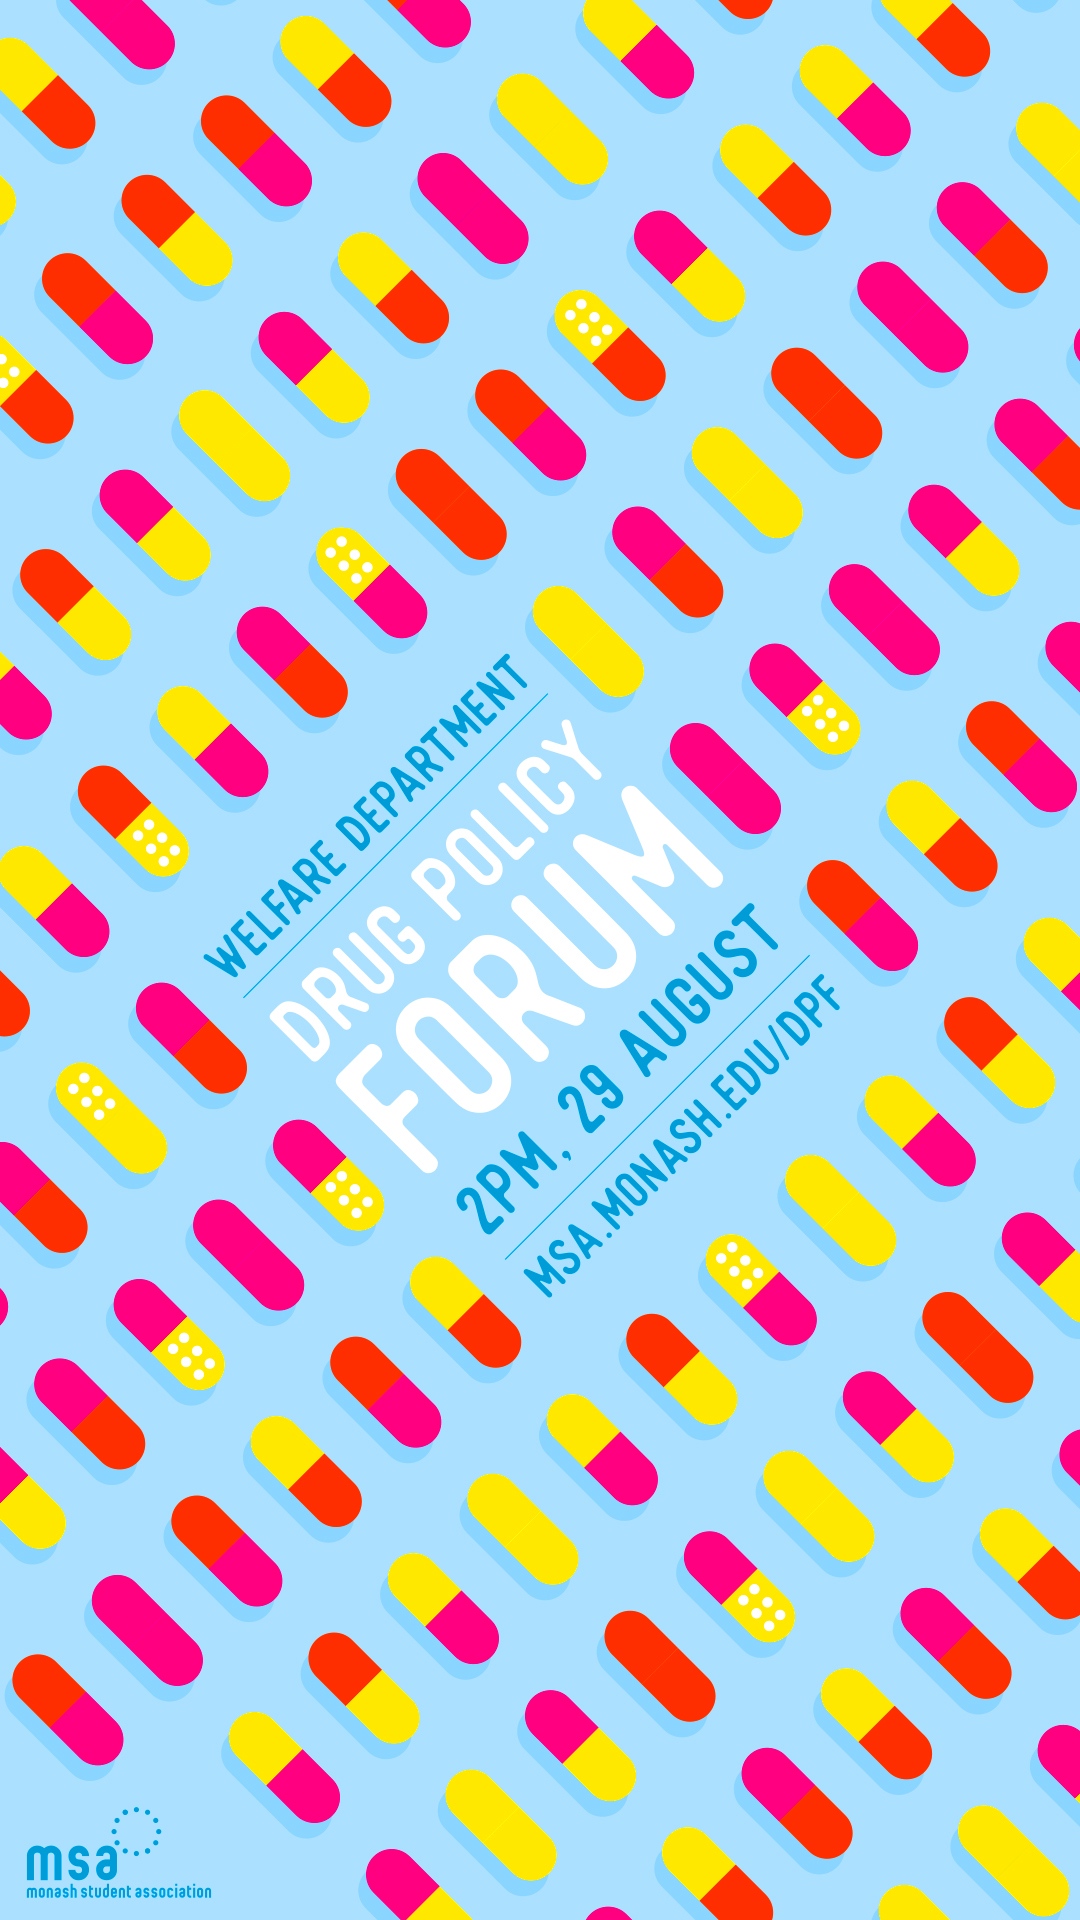 Drug Policy Forum